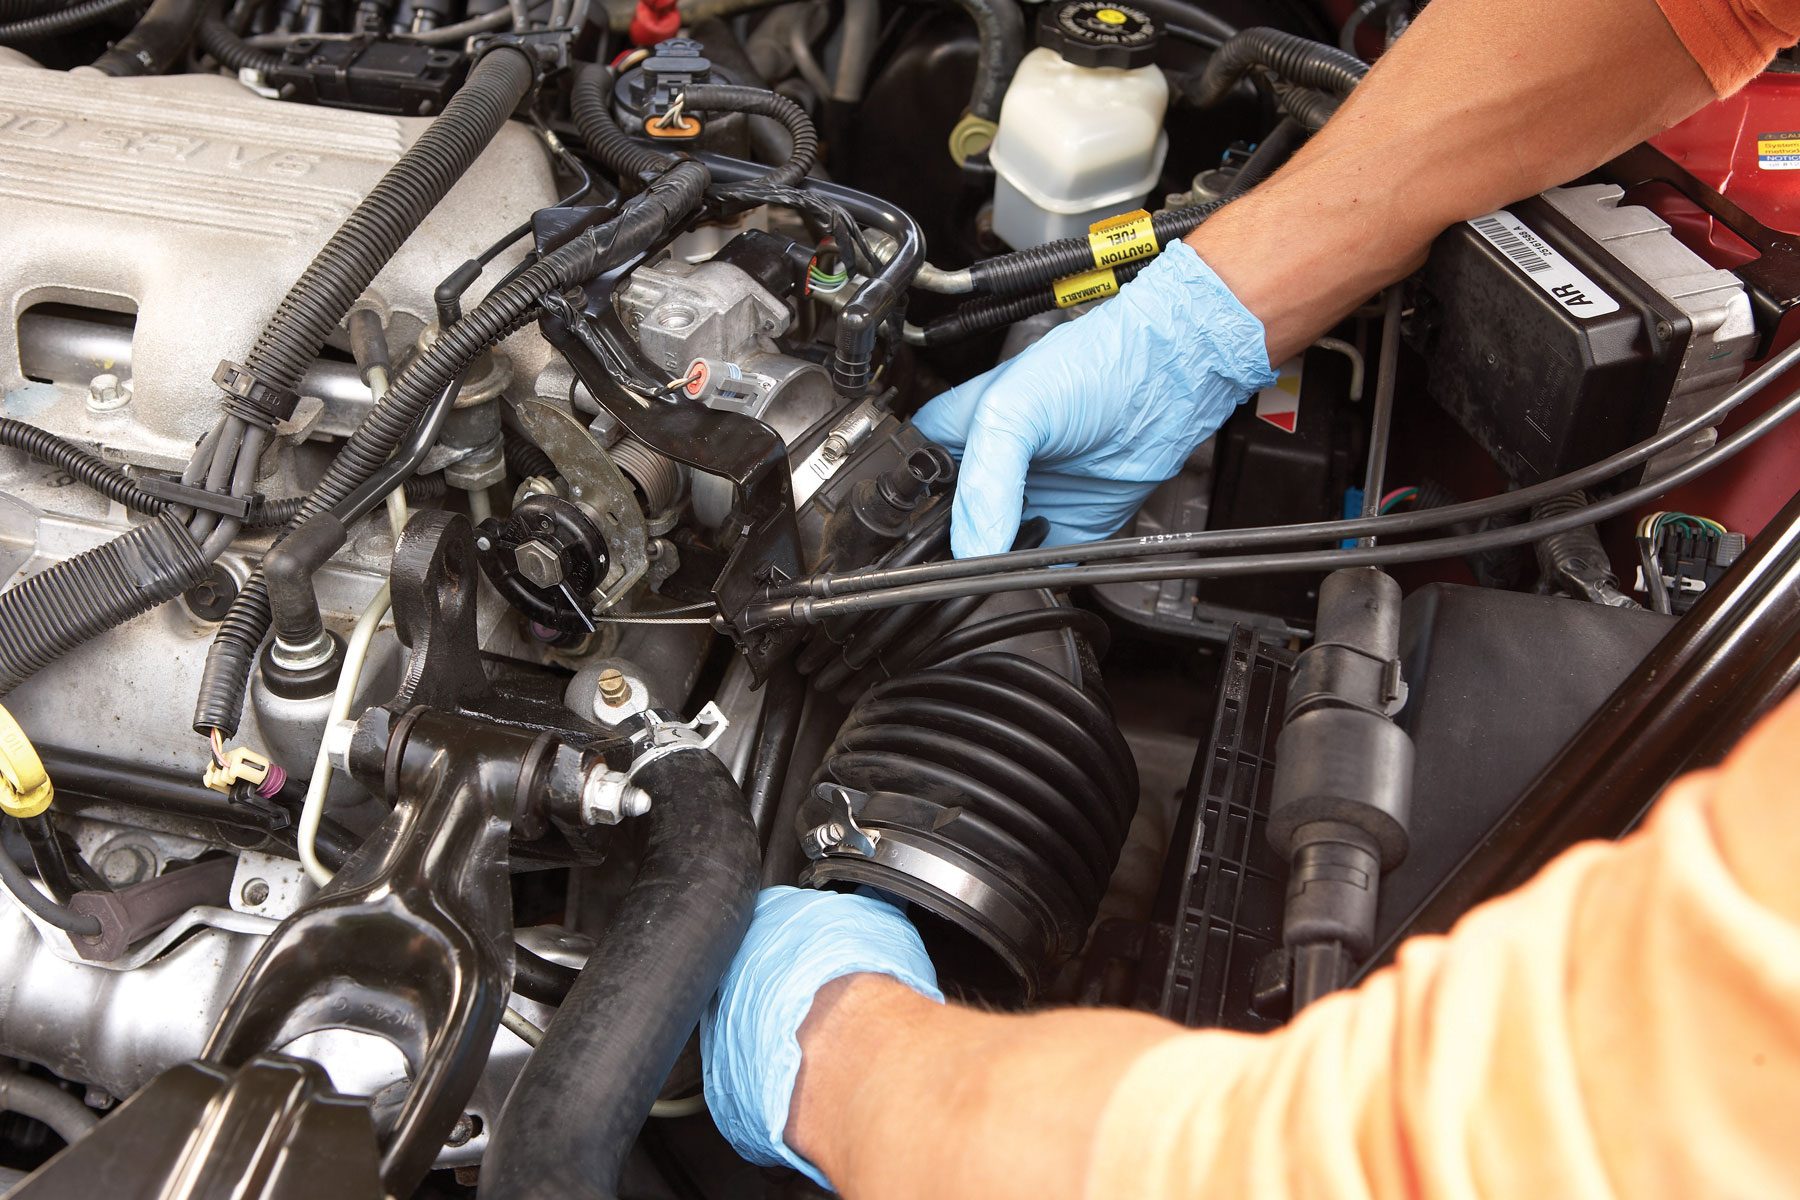 A person checking engine while wearing gloves